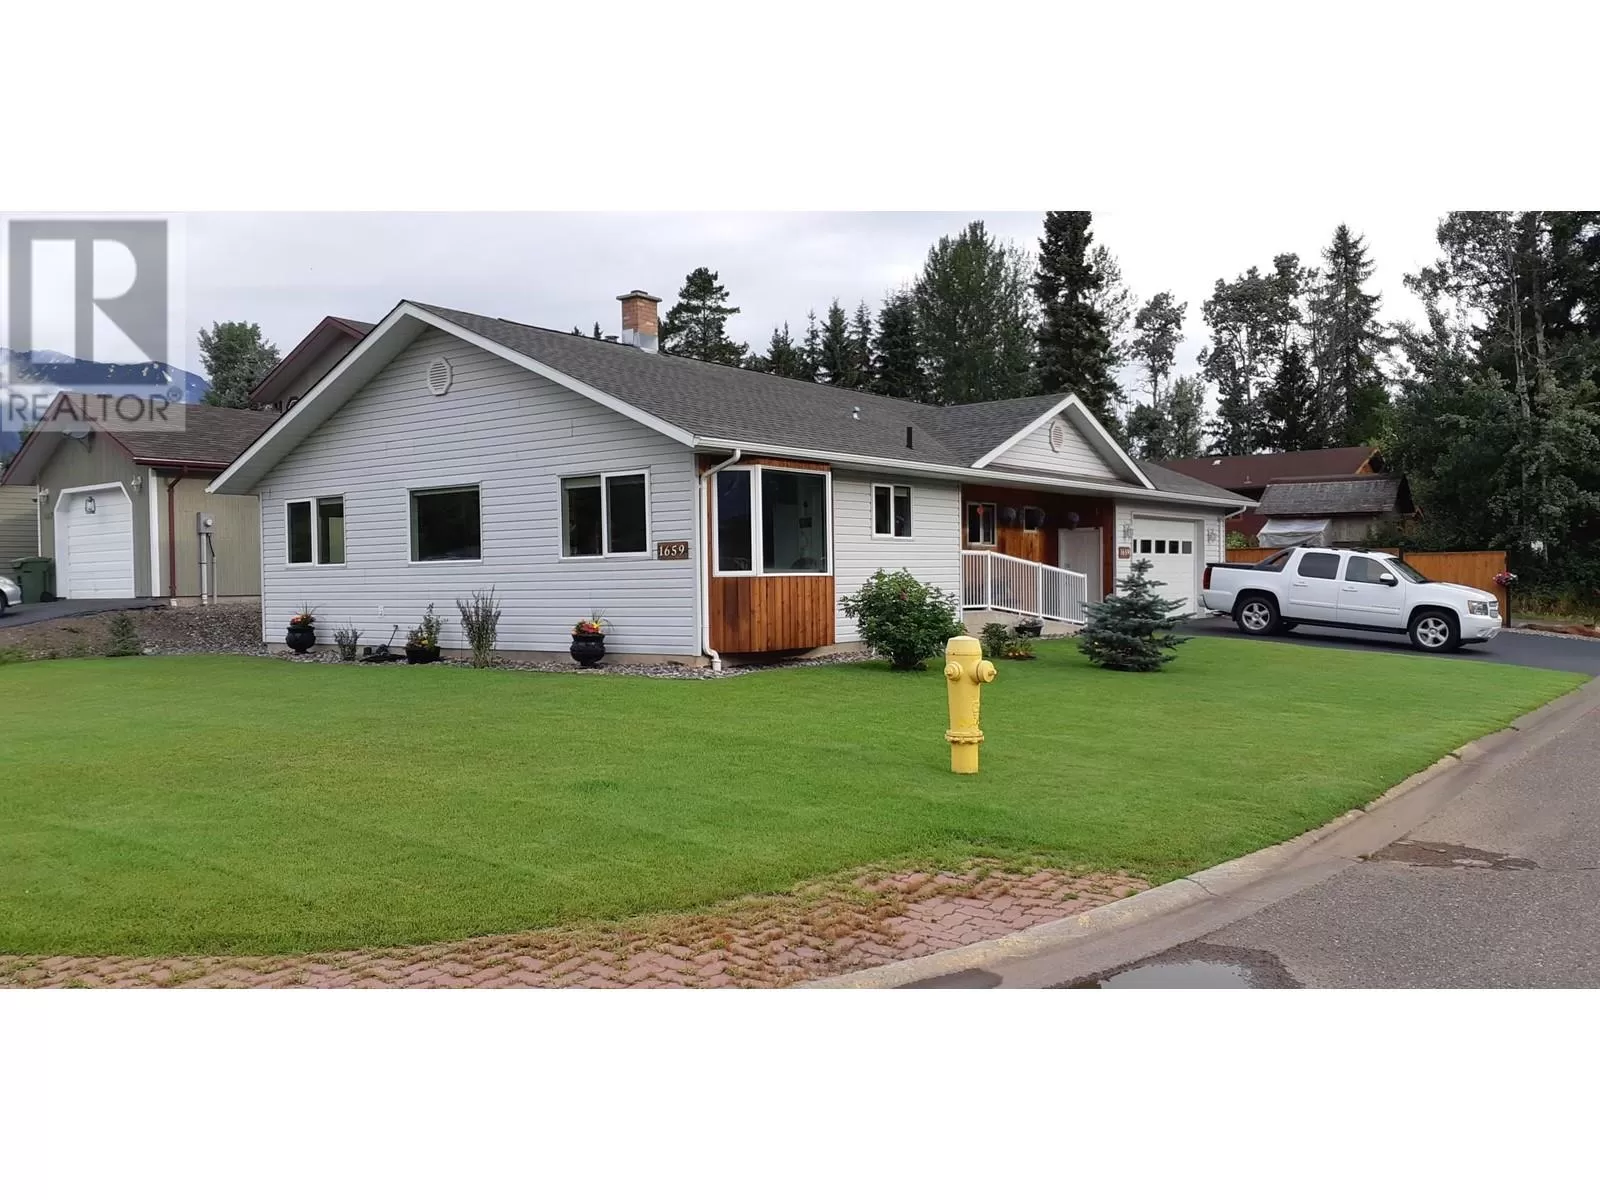 House for rent: 1659 Columbia Street, Smithers, British Columbia V0J 2N0